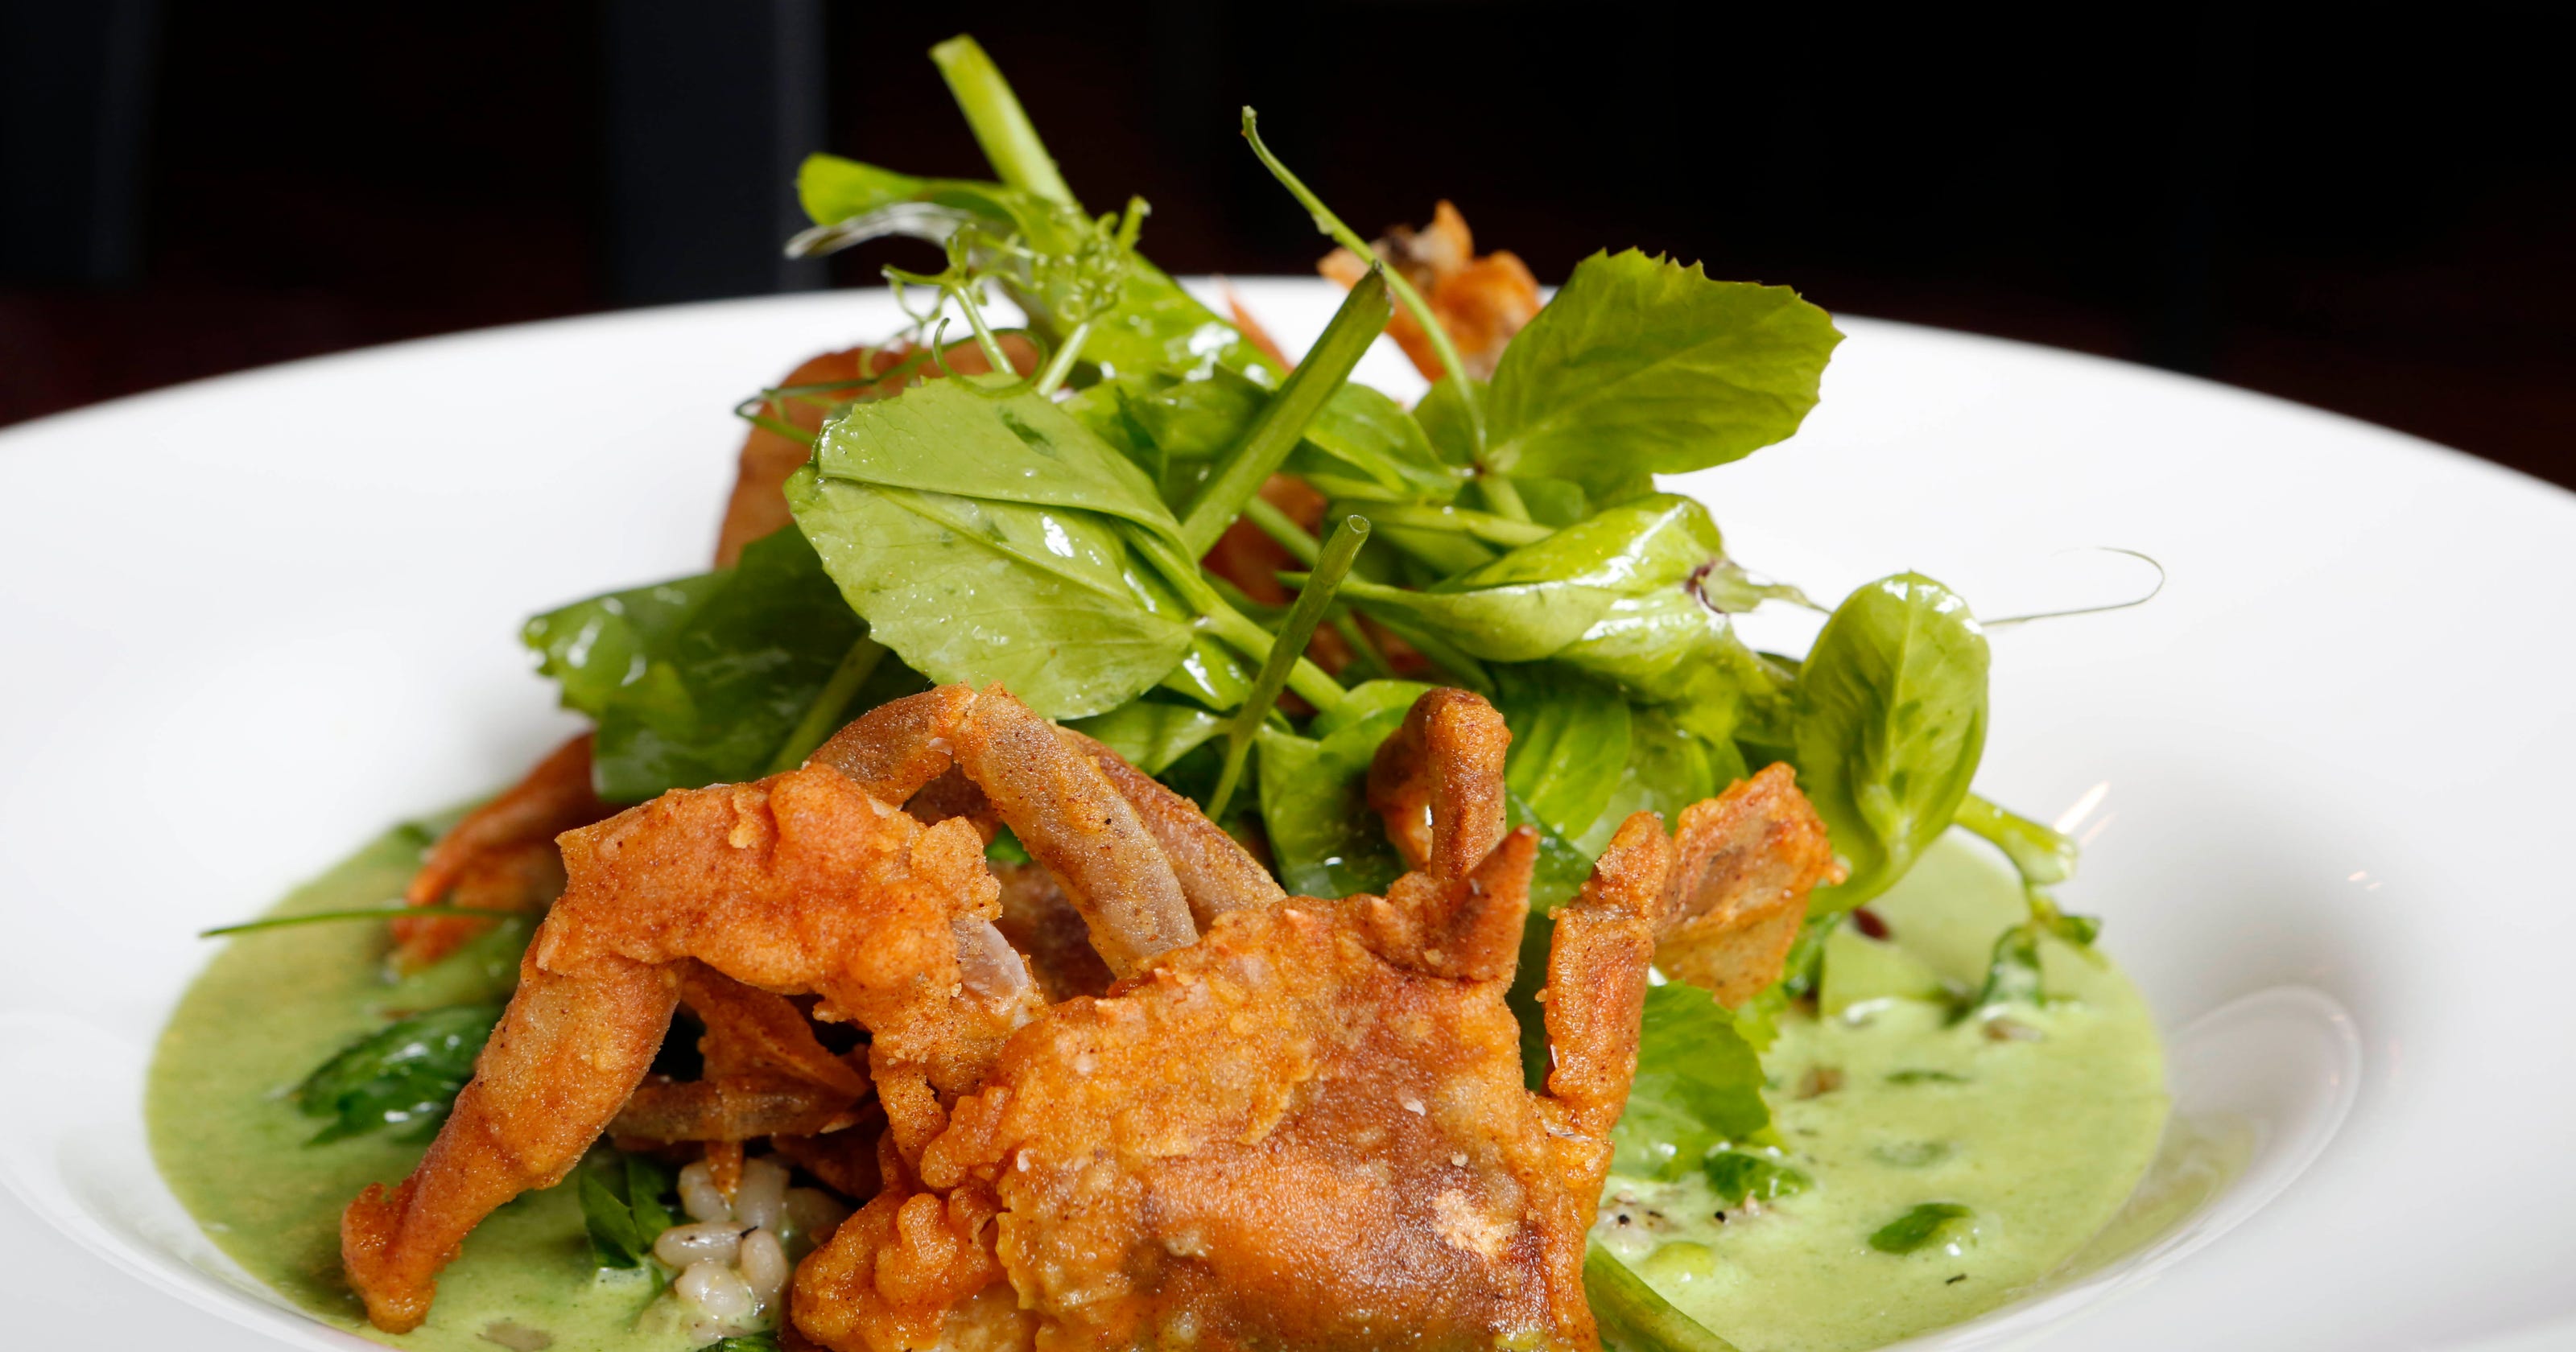 Where to Eat Soft-shell Crab in the Westchester, Rockland